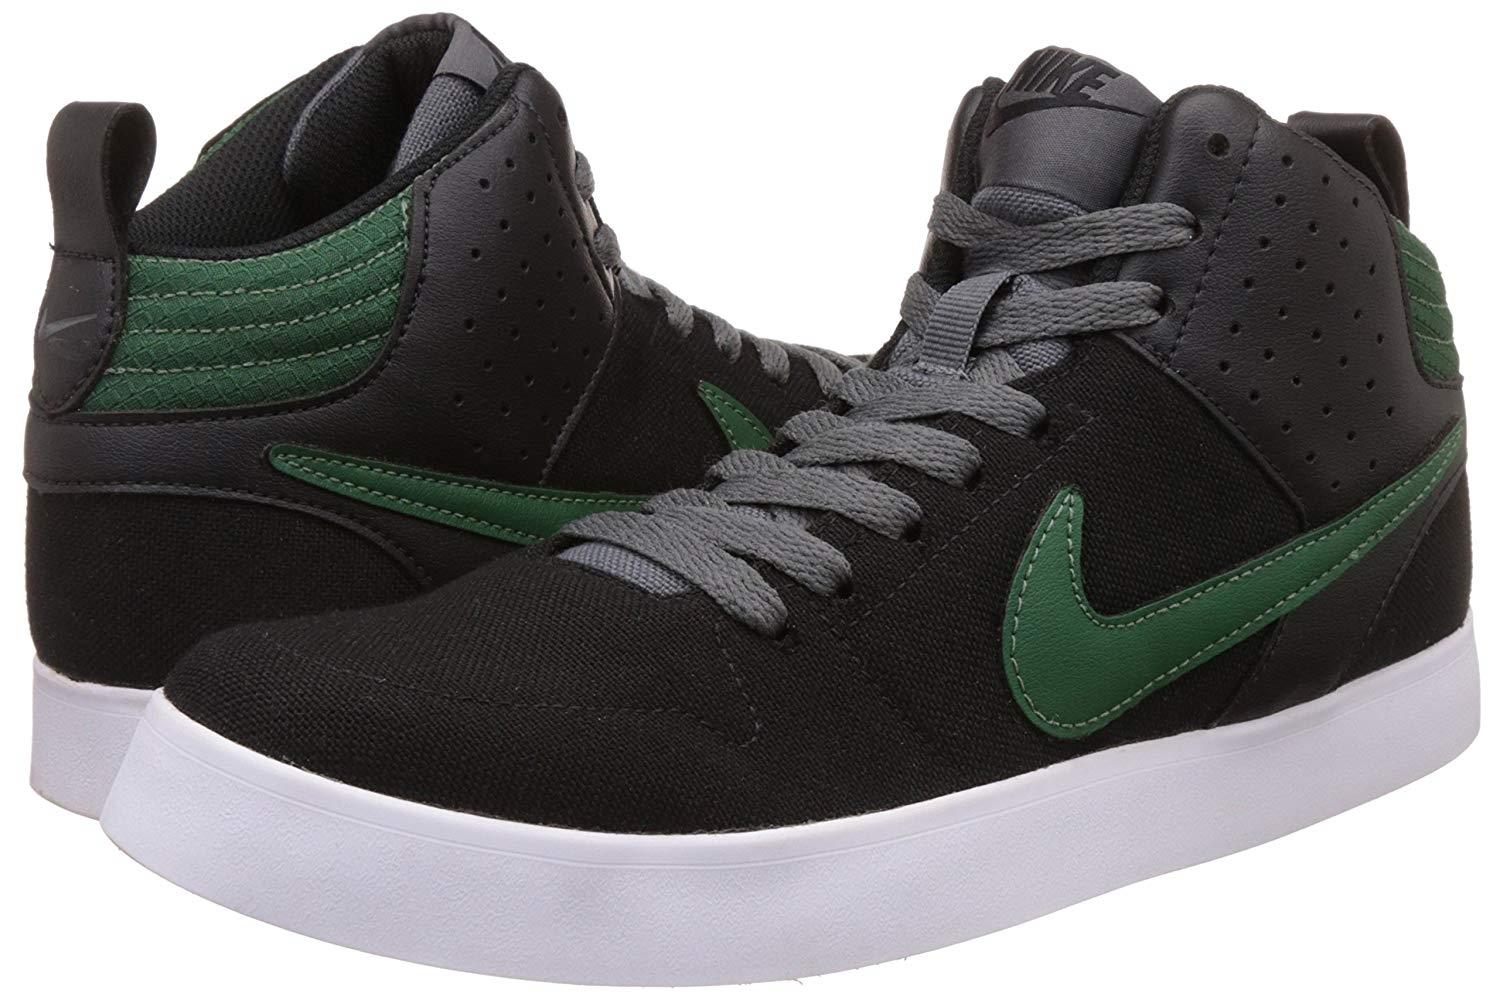 Buy Nike Men's Liteforce III Mid Carbon Green and Black Sneakers Online at  Low Prices in India - Paytmmall.com